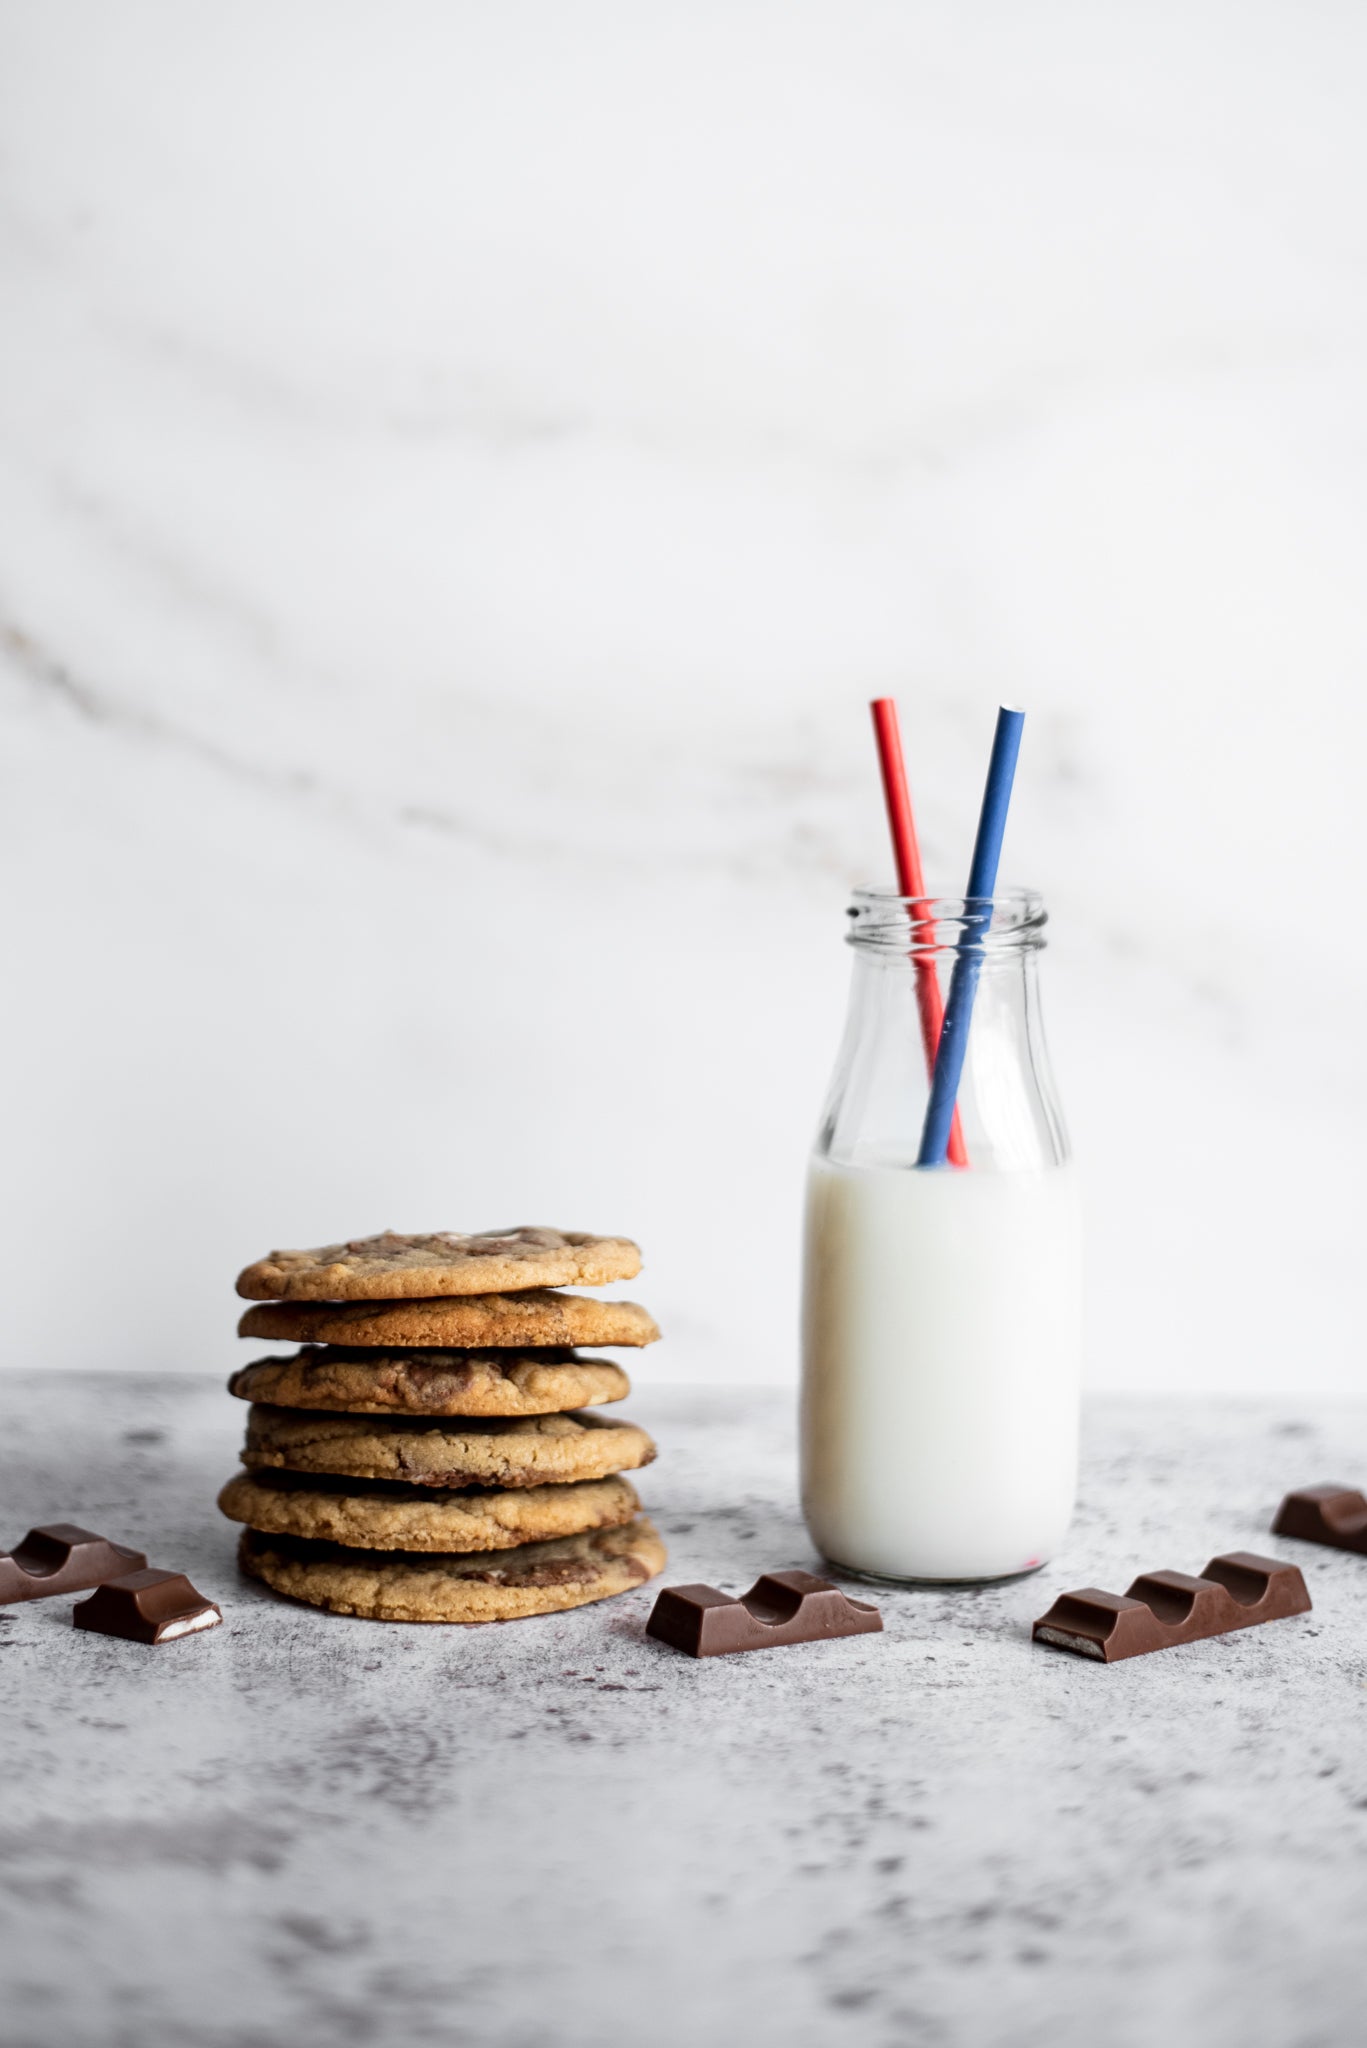 Six kinder copycat millies cookies in a neat pile next to a milk bottle with two straws